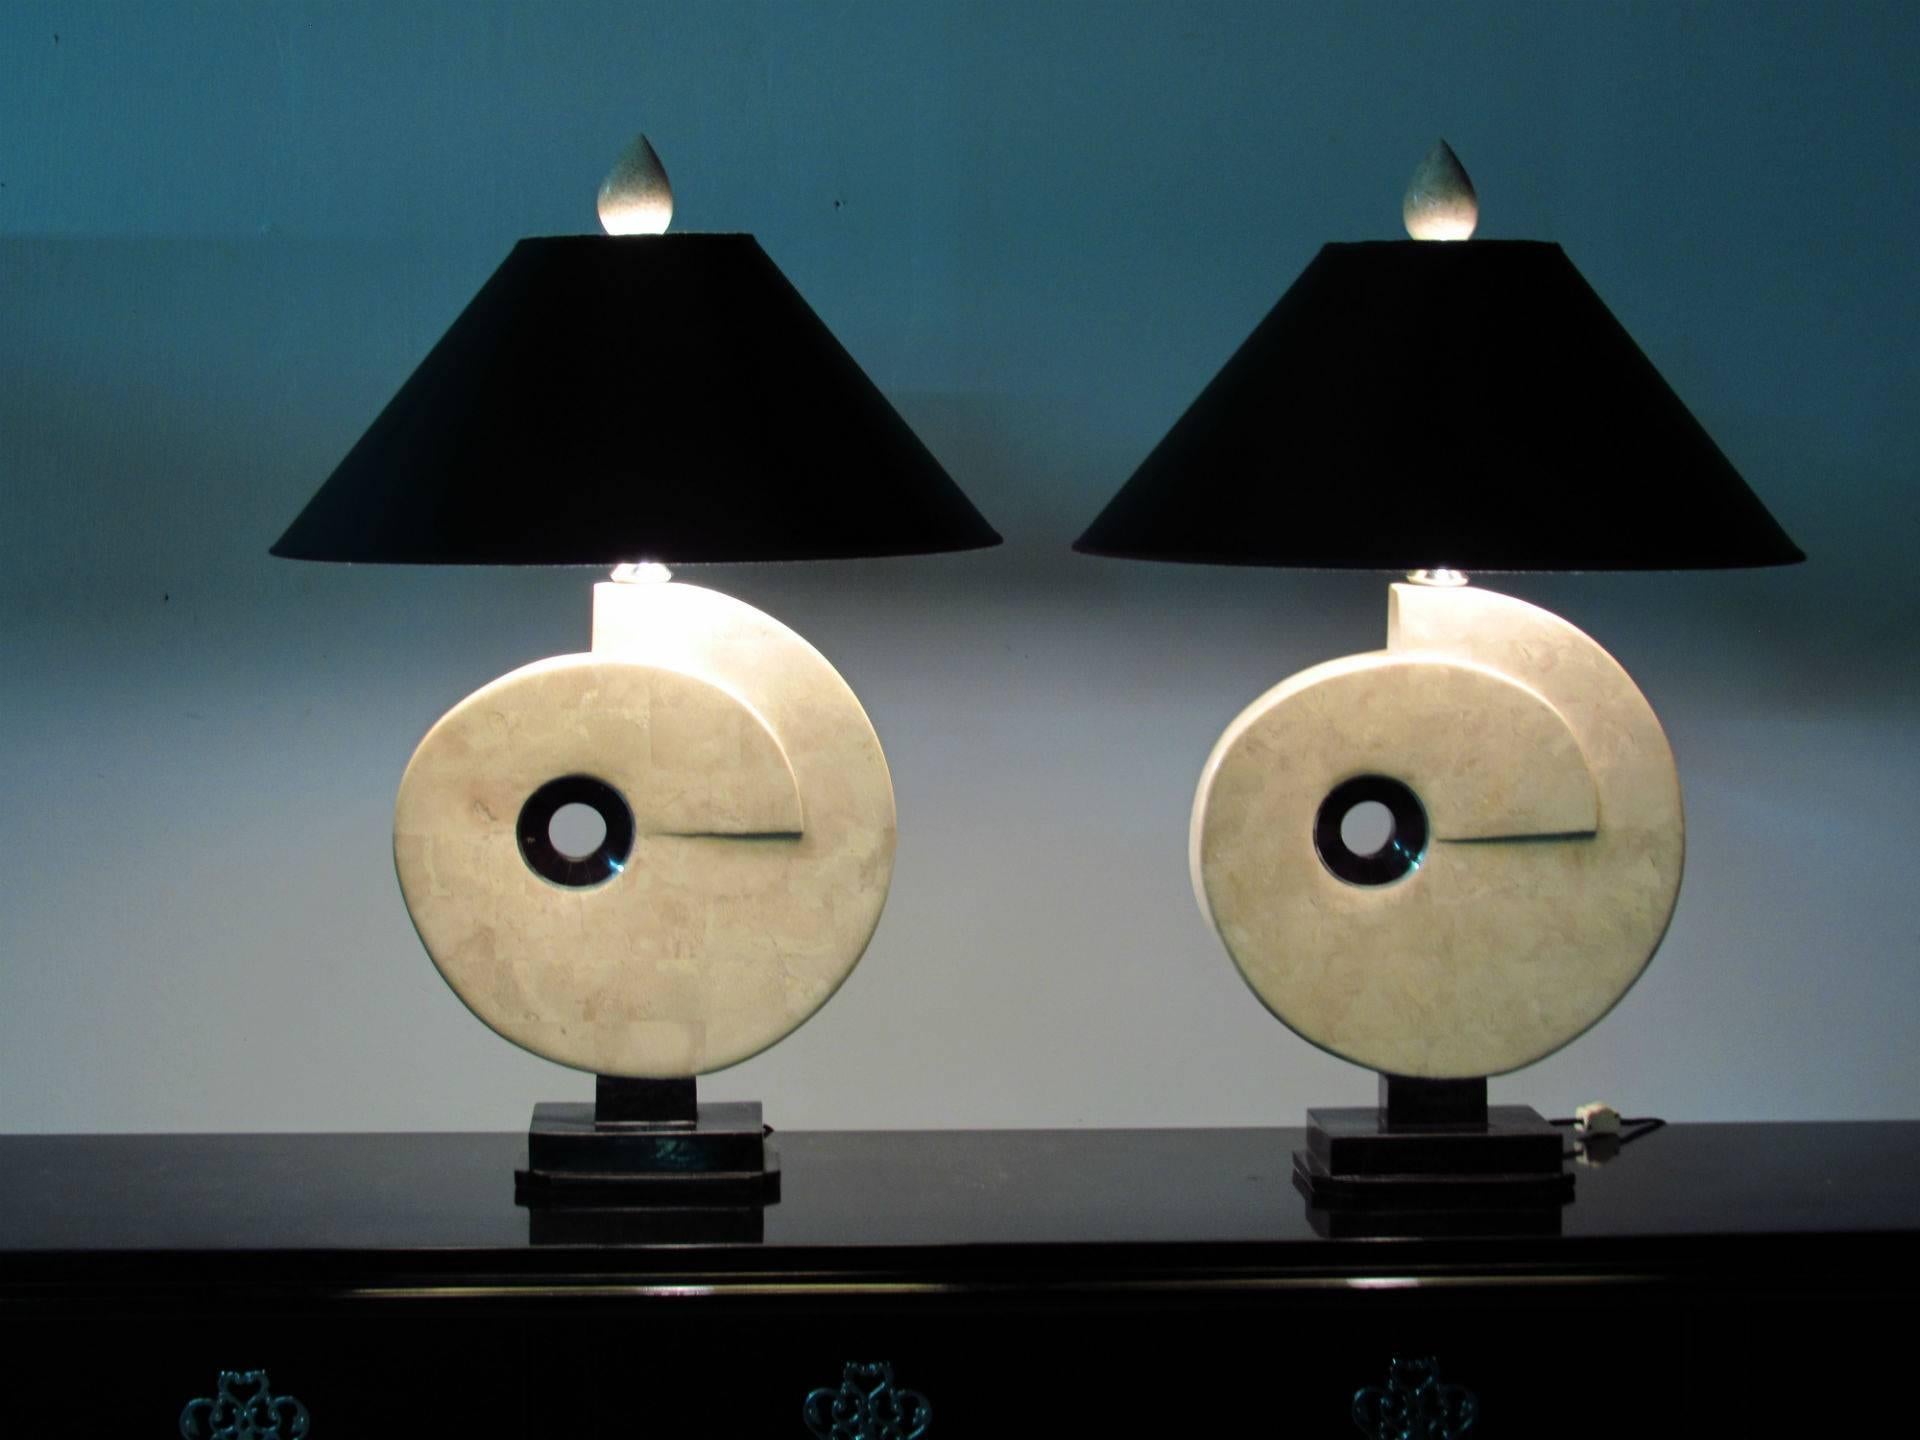 Beautifully crafted pair of table lamps in the shape of large Nautilus shells made of tessellated fossil stone pieces, back tessellated marble centers and polished nickel hardware.  Each lamp sits on a polished black marble bases and is topped by a